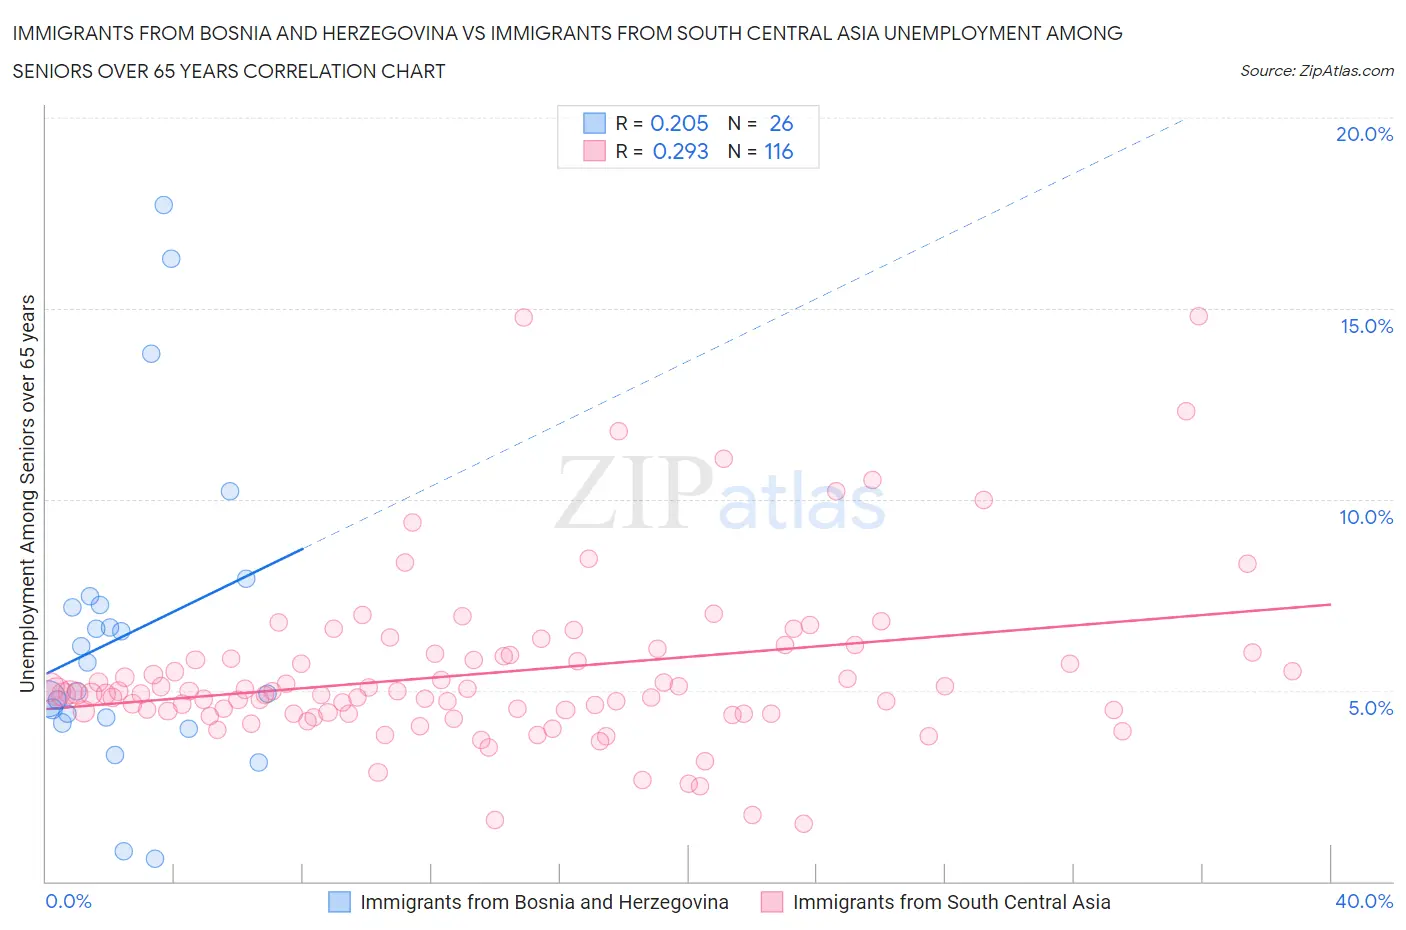 Immigrants from Bosnia and Herzegovina vs Immigrants from South Central Asia Unemployment Among Seniors over 65 years